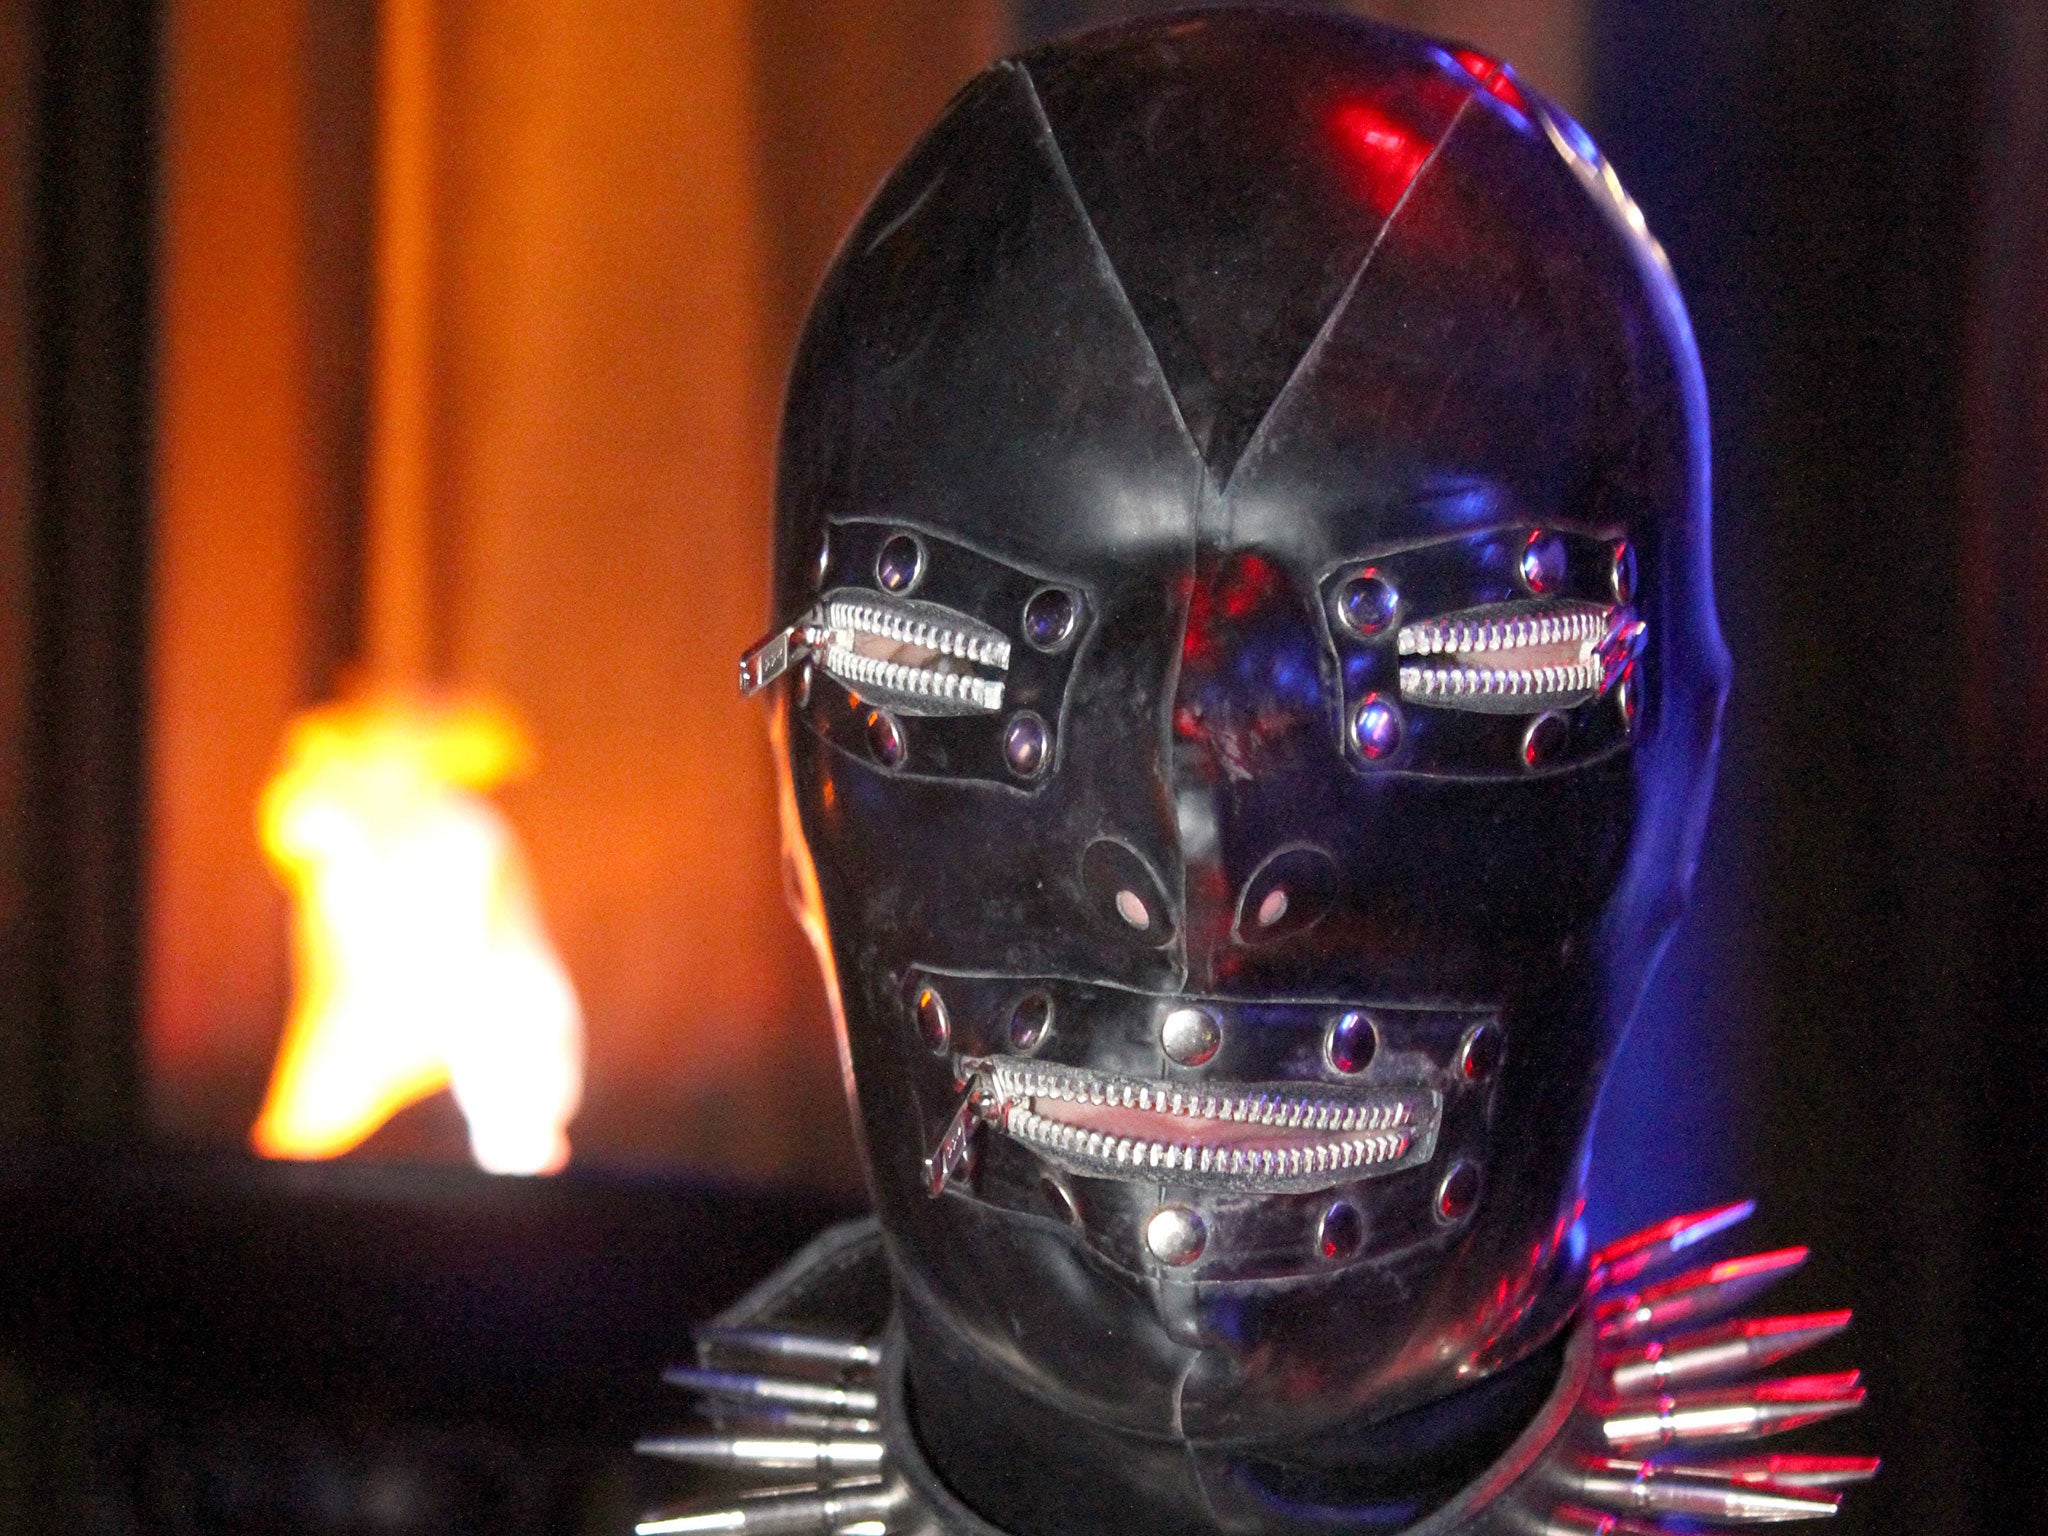 The Gimp Man of Essex: 'I don't go round to scare people, I want to do  good', The Independent